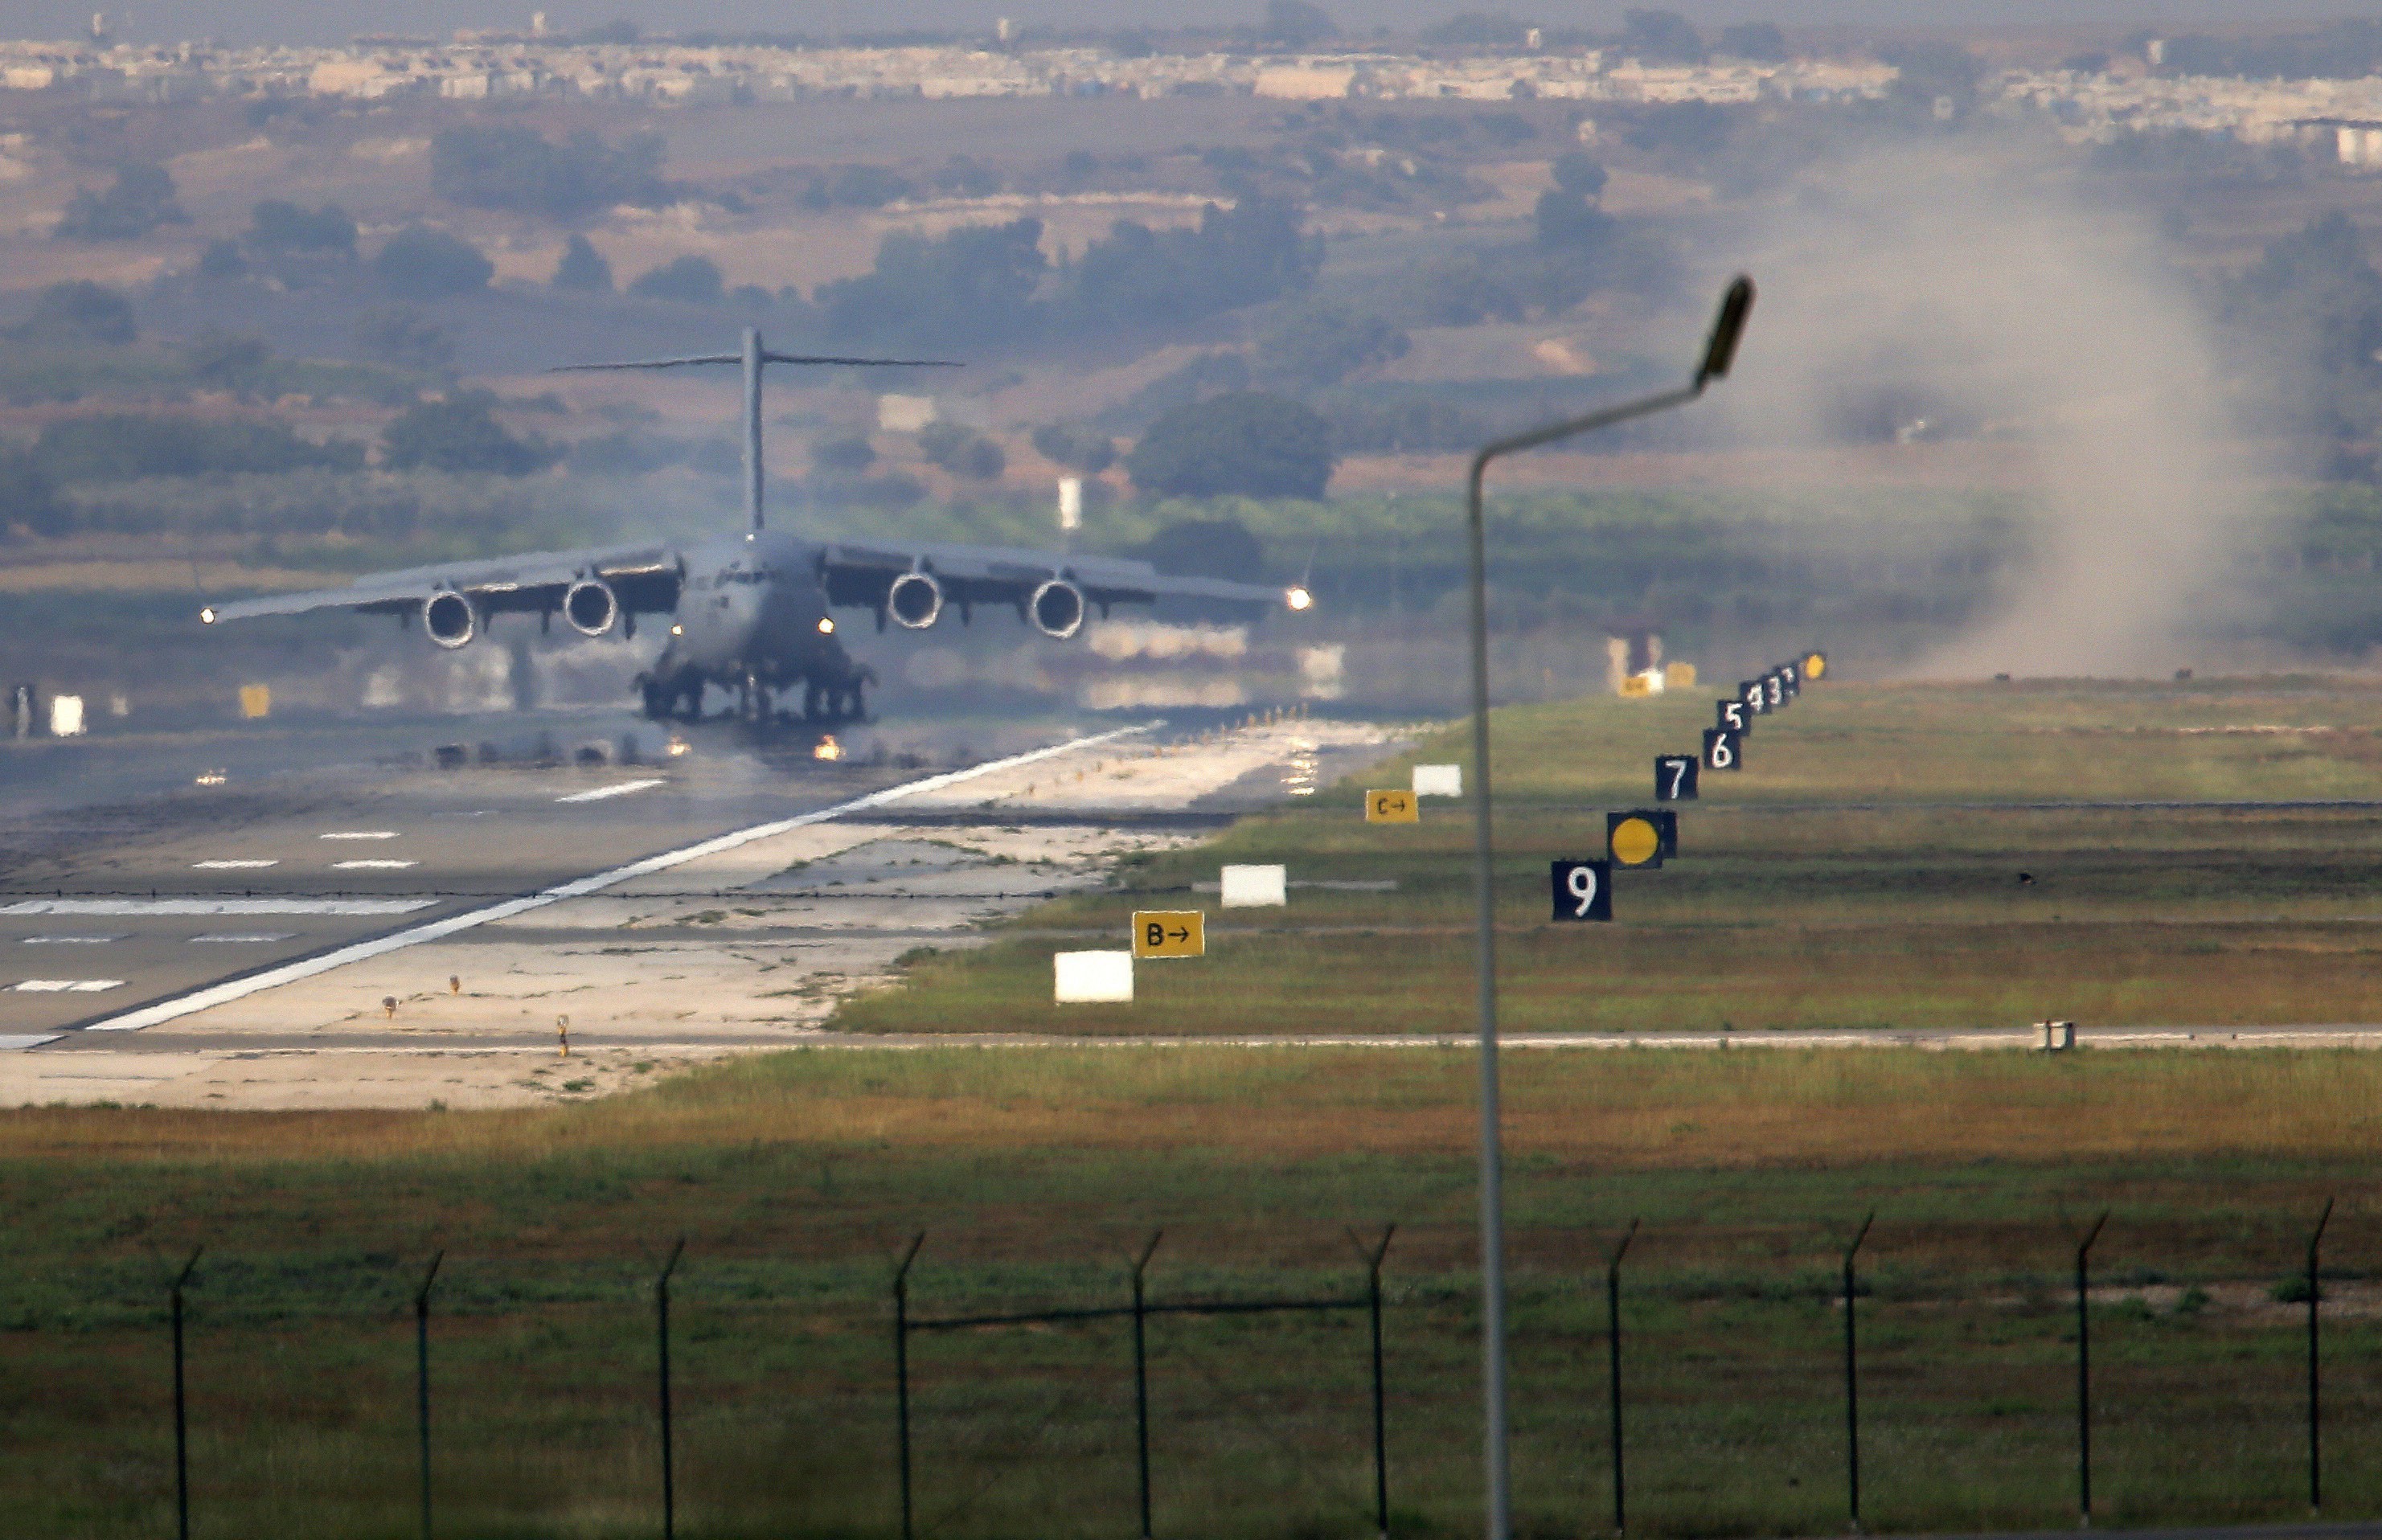 German Troops ‘Ready for Transfer’ from Turkey’s Incirlik Airbase: Defense Minister